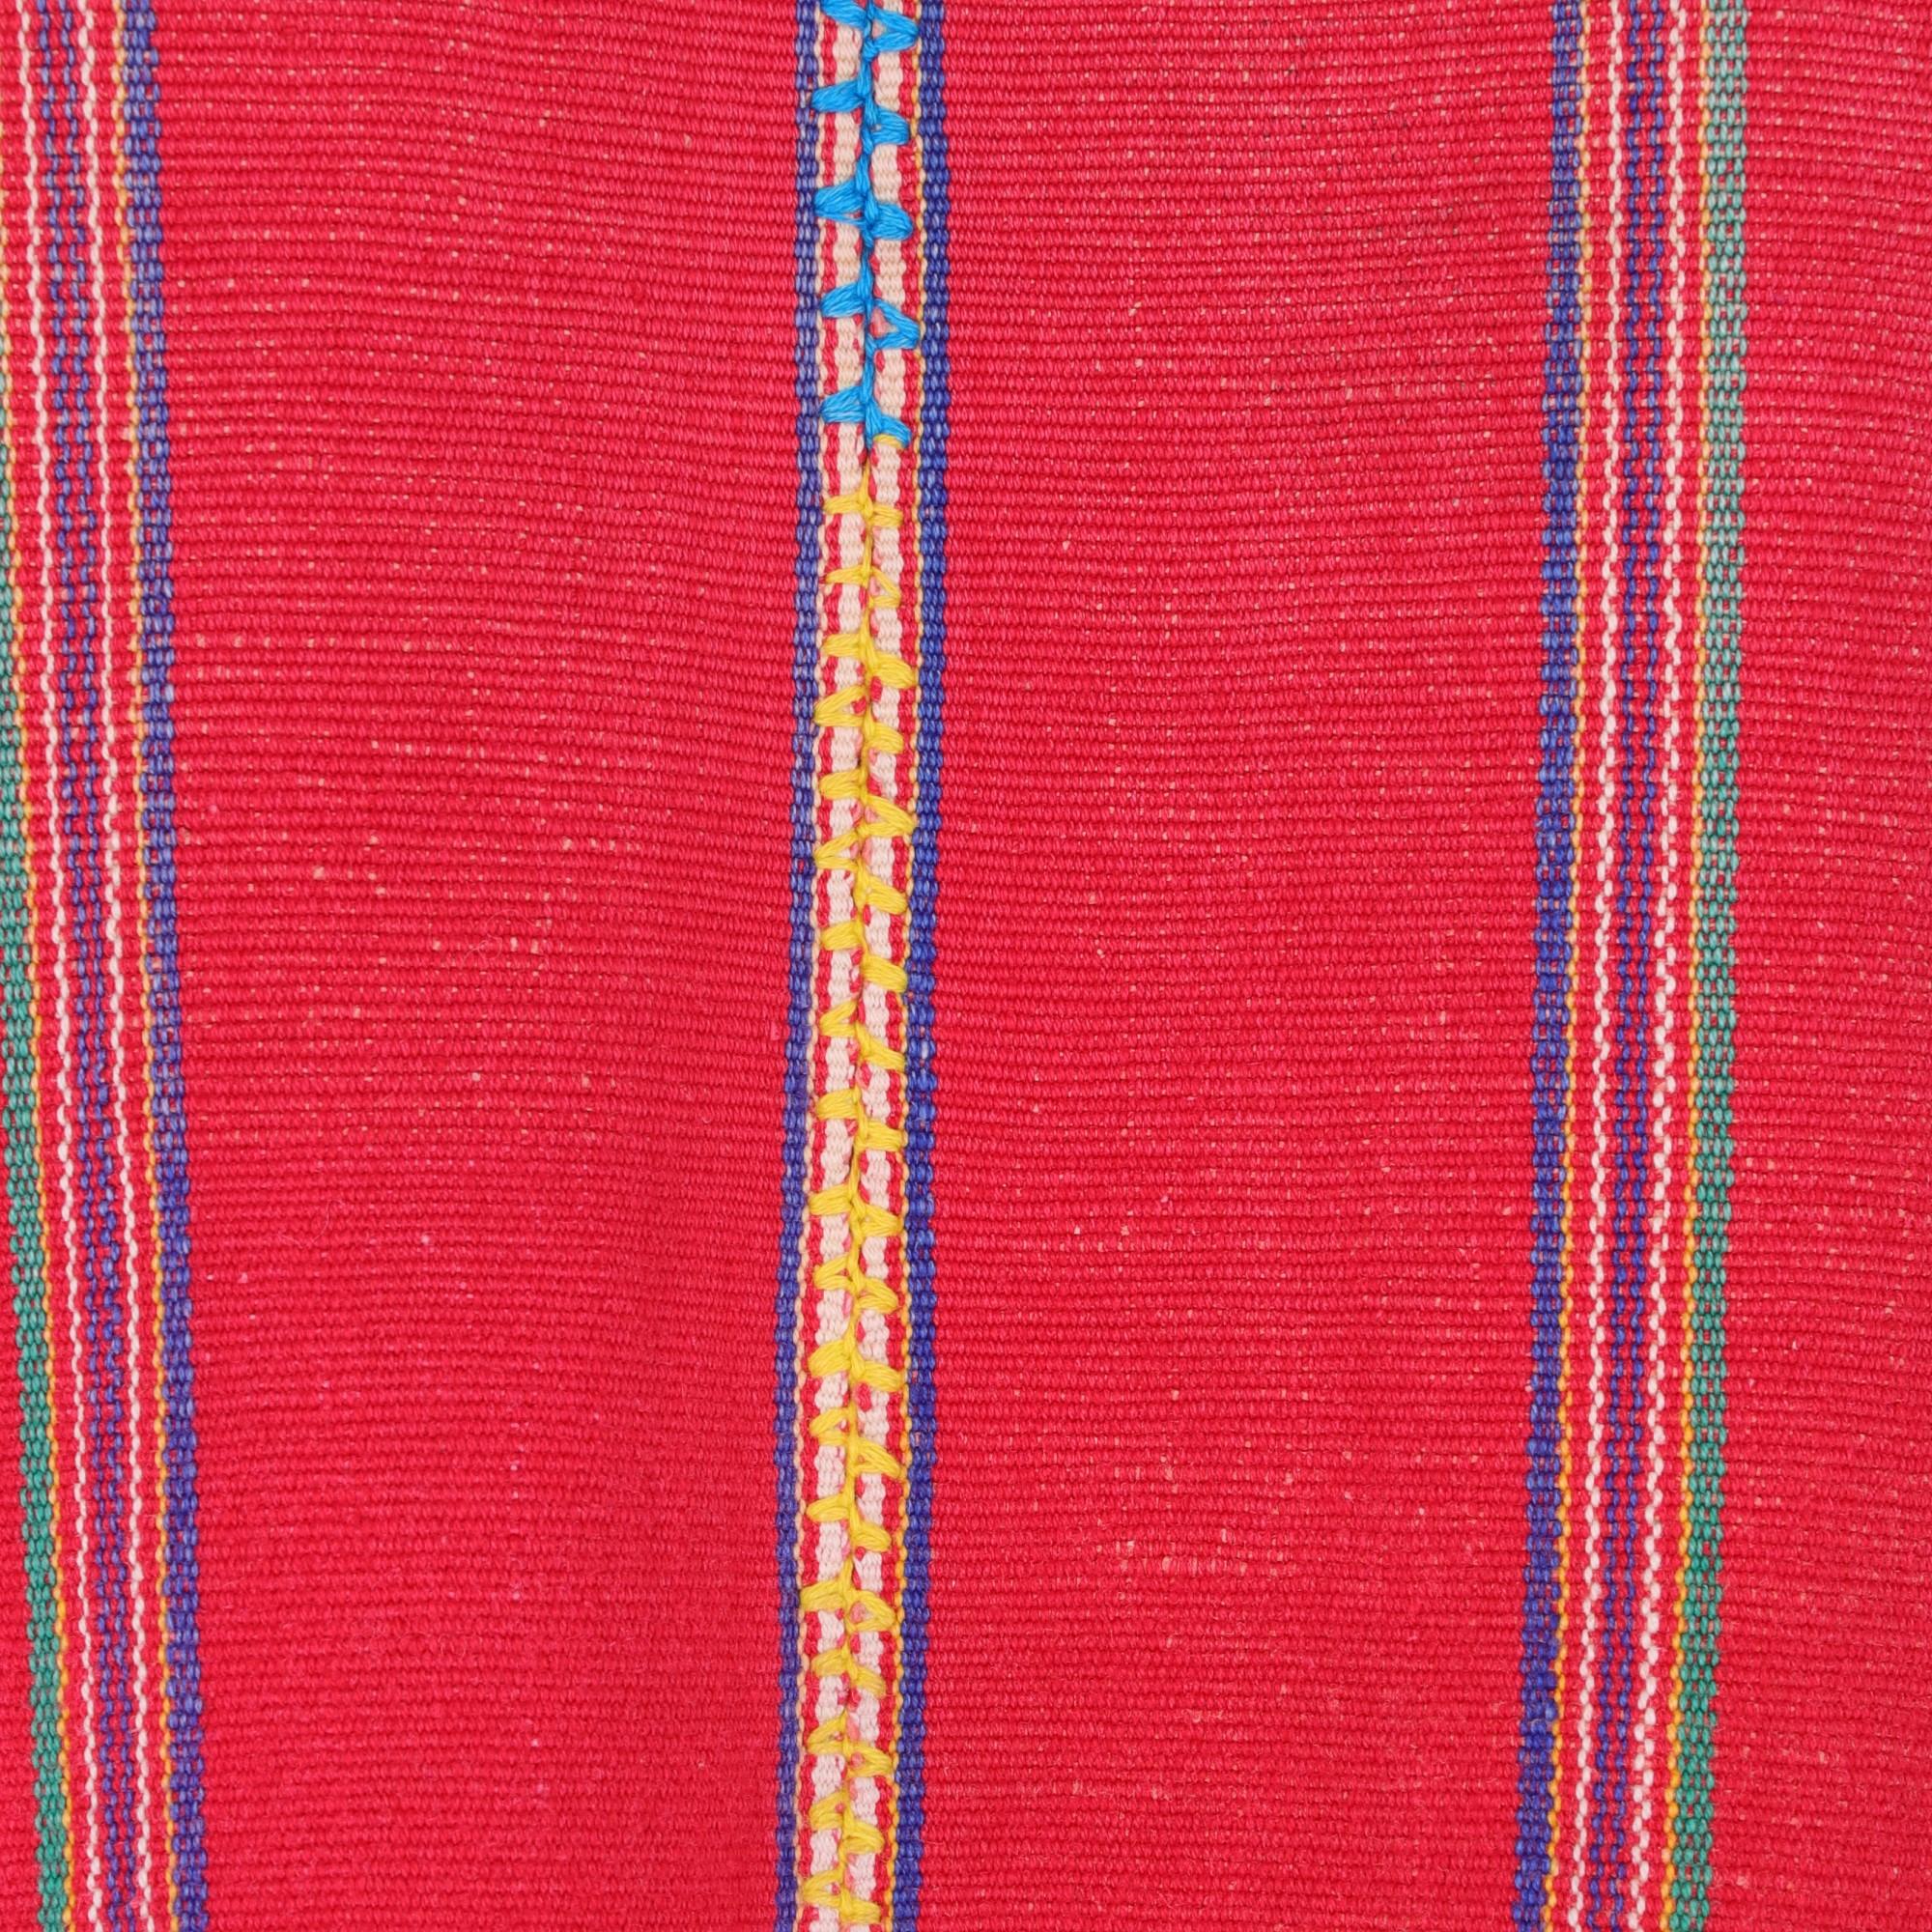 Guatemala ethnic handmade straight top in red cotton with blue white yellow and green vertical stripes. With squared neckline and decorative flower embroideries.
The item shows small signs of wear on the embroideries, as shown in the pictures.
Being